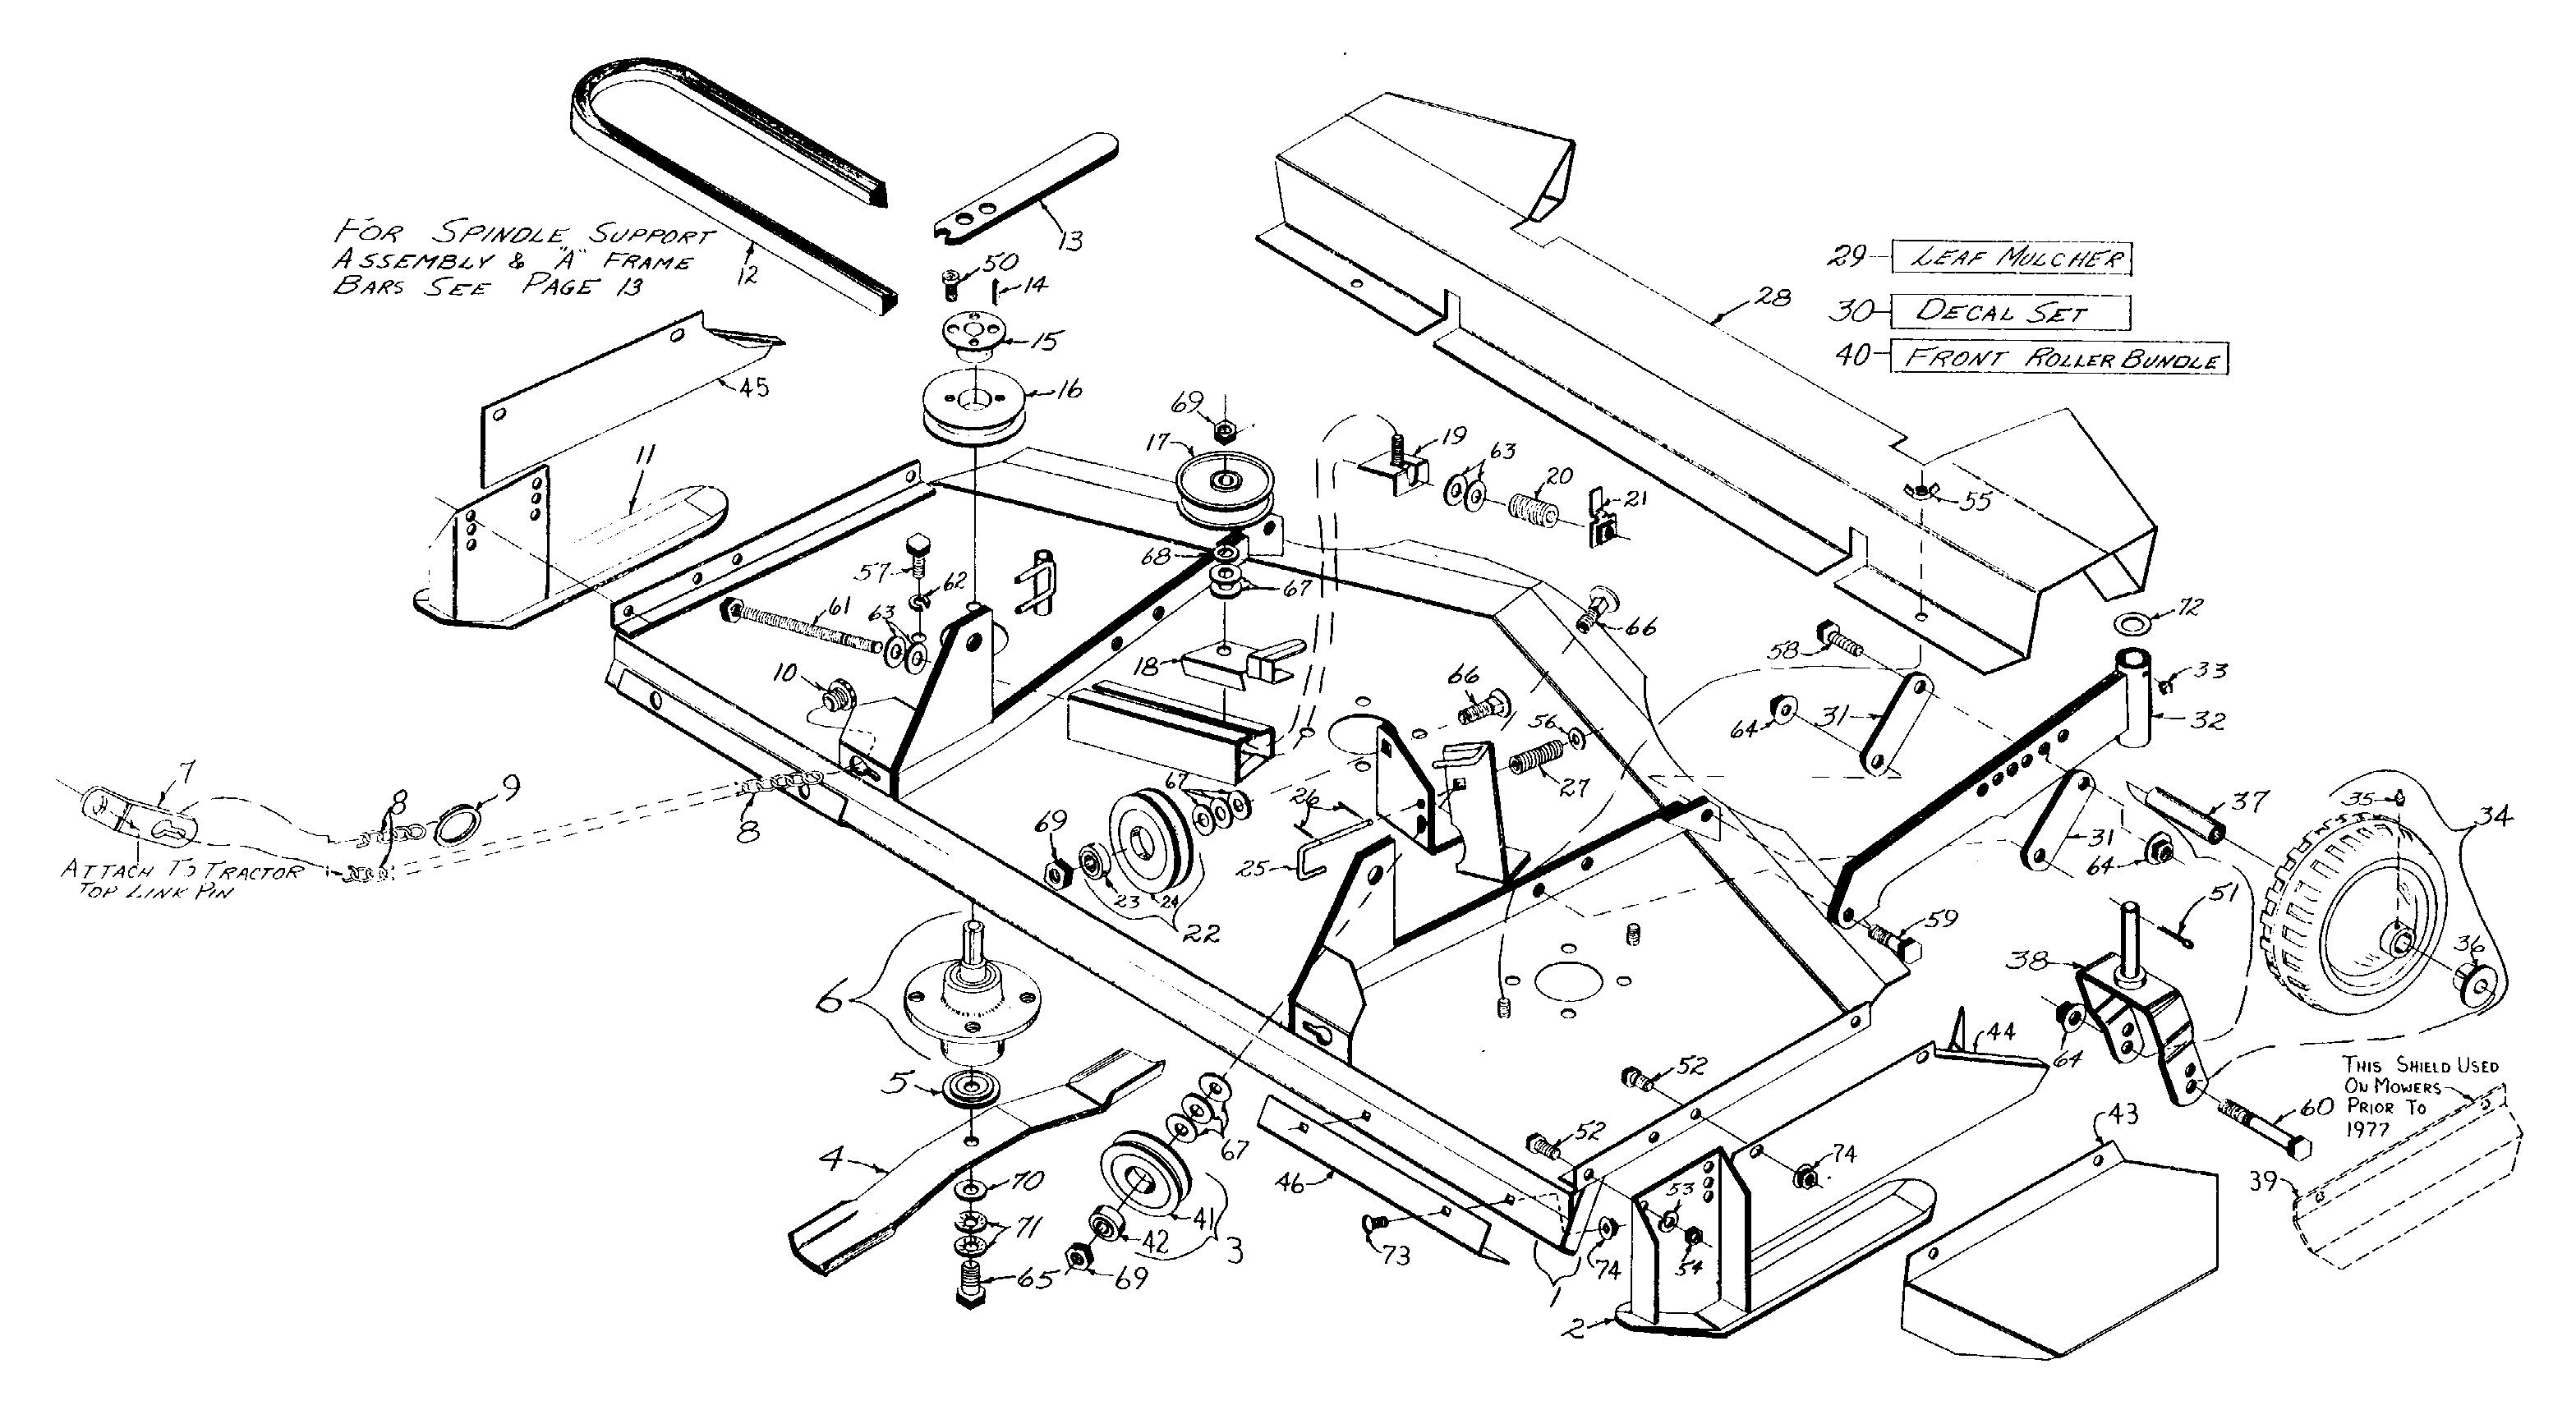 Leaf Spring assembly Diagram Woods Rm59k 1 Rearmount Finish Mower Main Frame assembly assembly Of Leaf Spring assembly Diagram